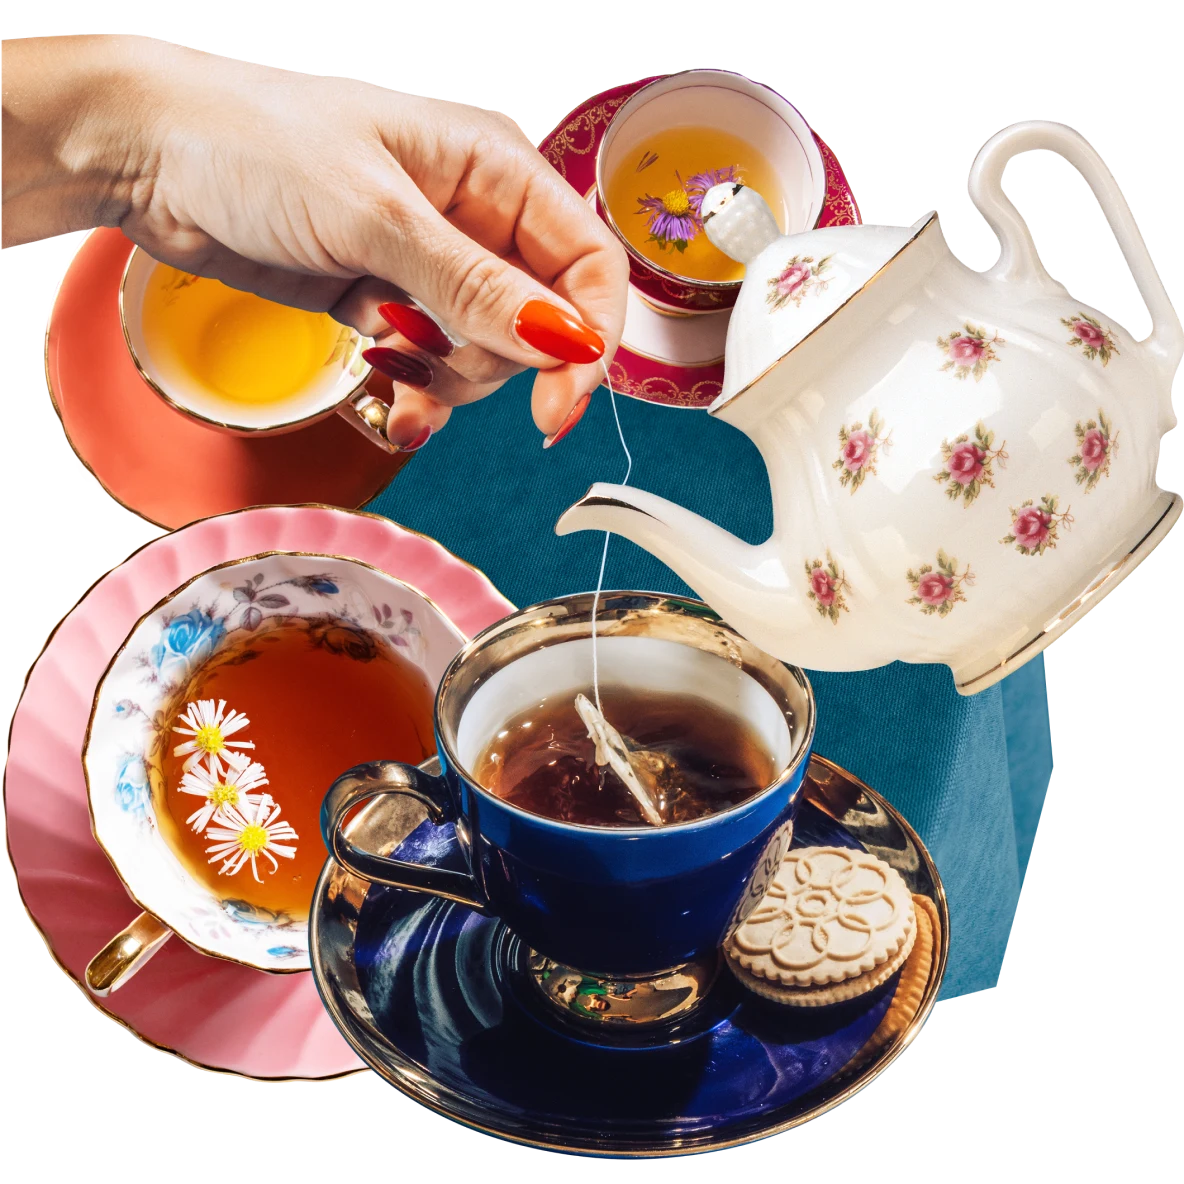 Collage of teacups filled with tea in dark and amber shades. A white teapot, patterned with pink roses tilts downwards. A white hand dips a tea bag into a dark blue cup filled with tea.